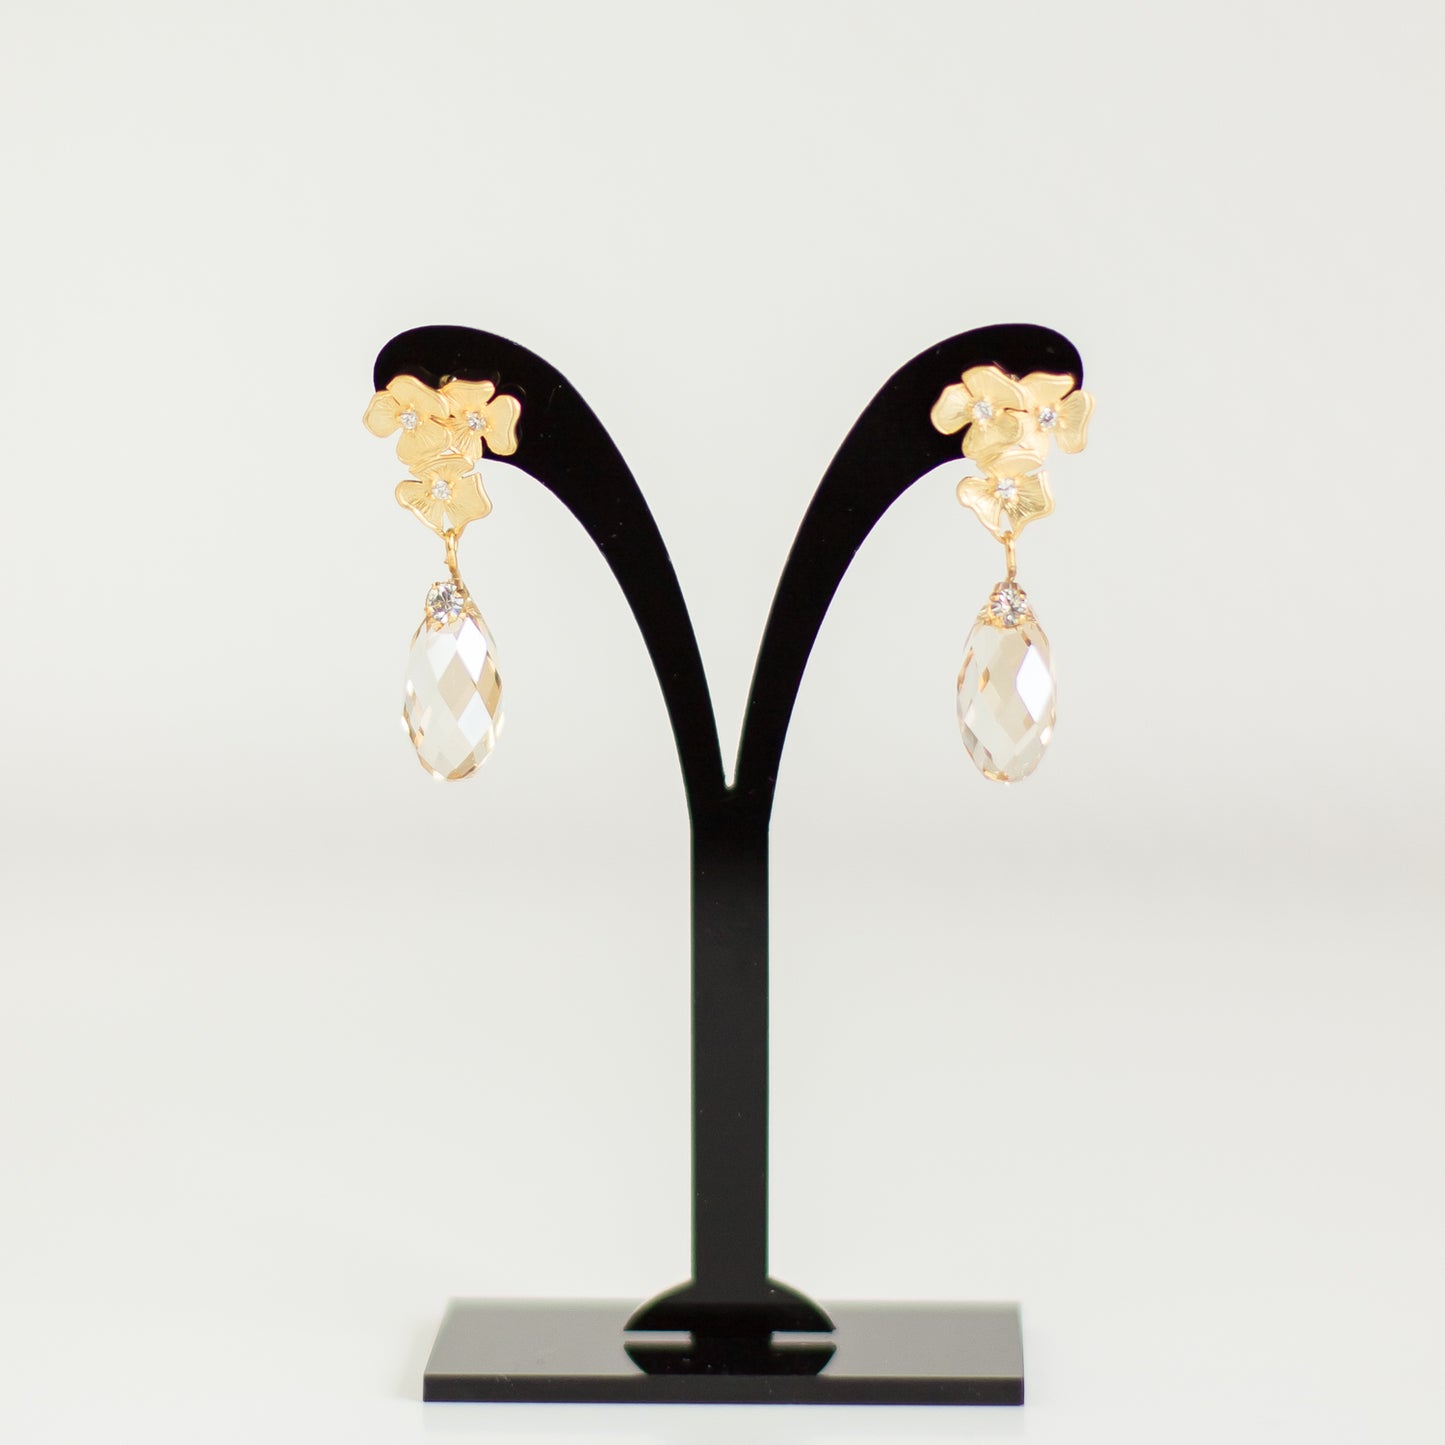 Discover these elegant crystal earrings featuring delicate floral studs and drop-shaped Swarovski golden shadow crystals, perfect for any occasion.